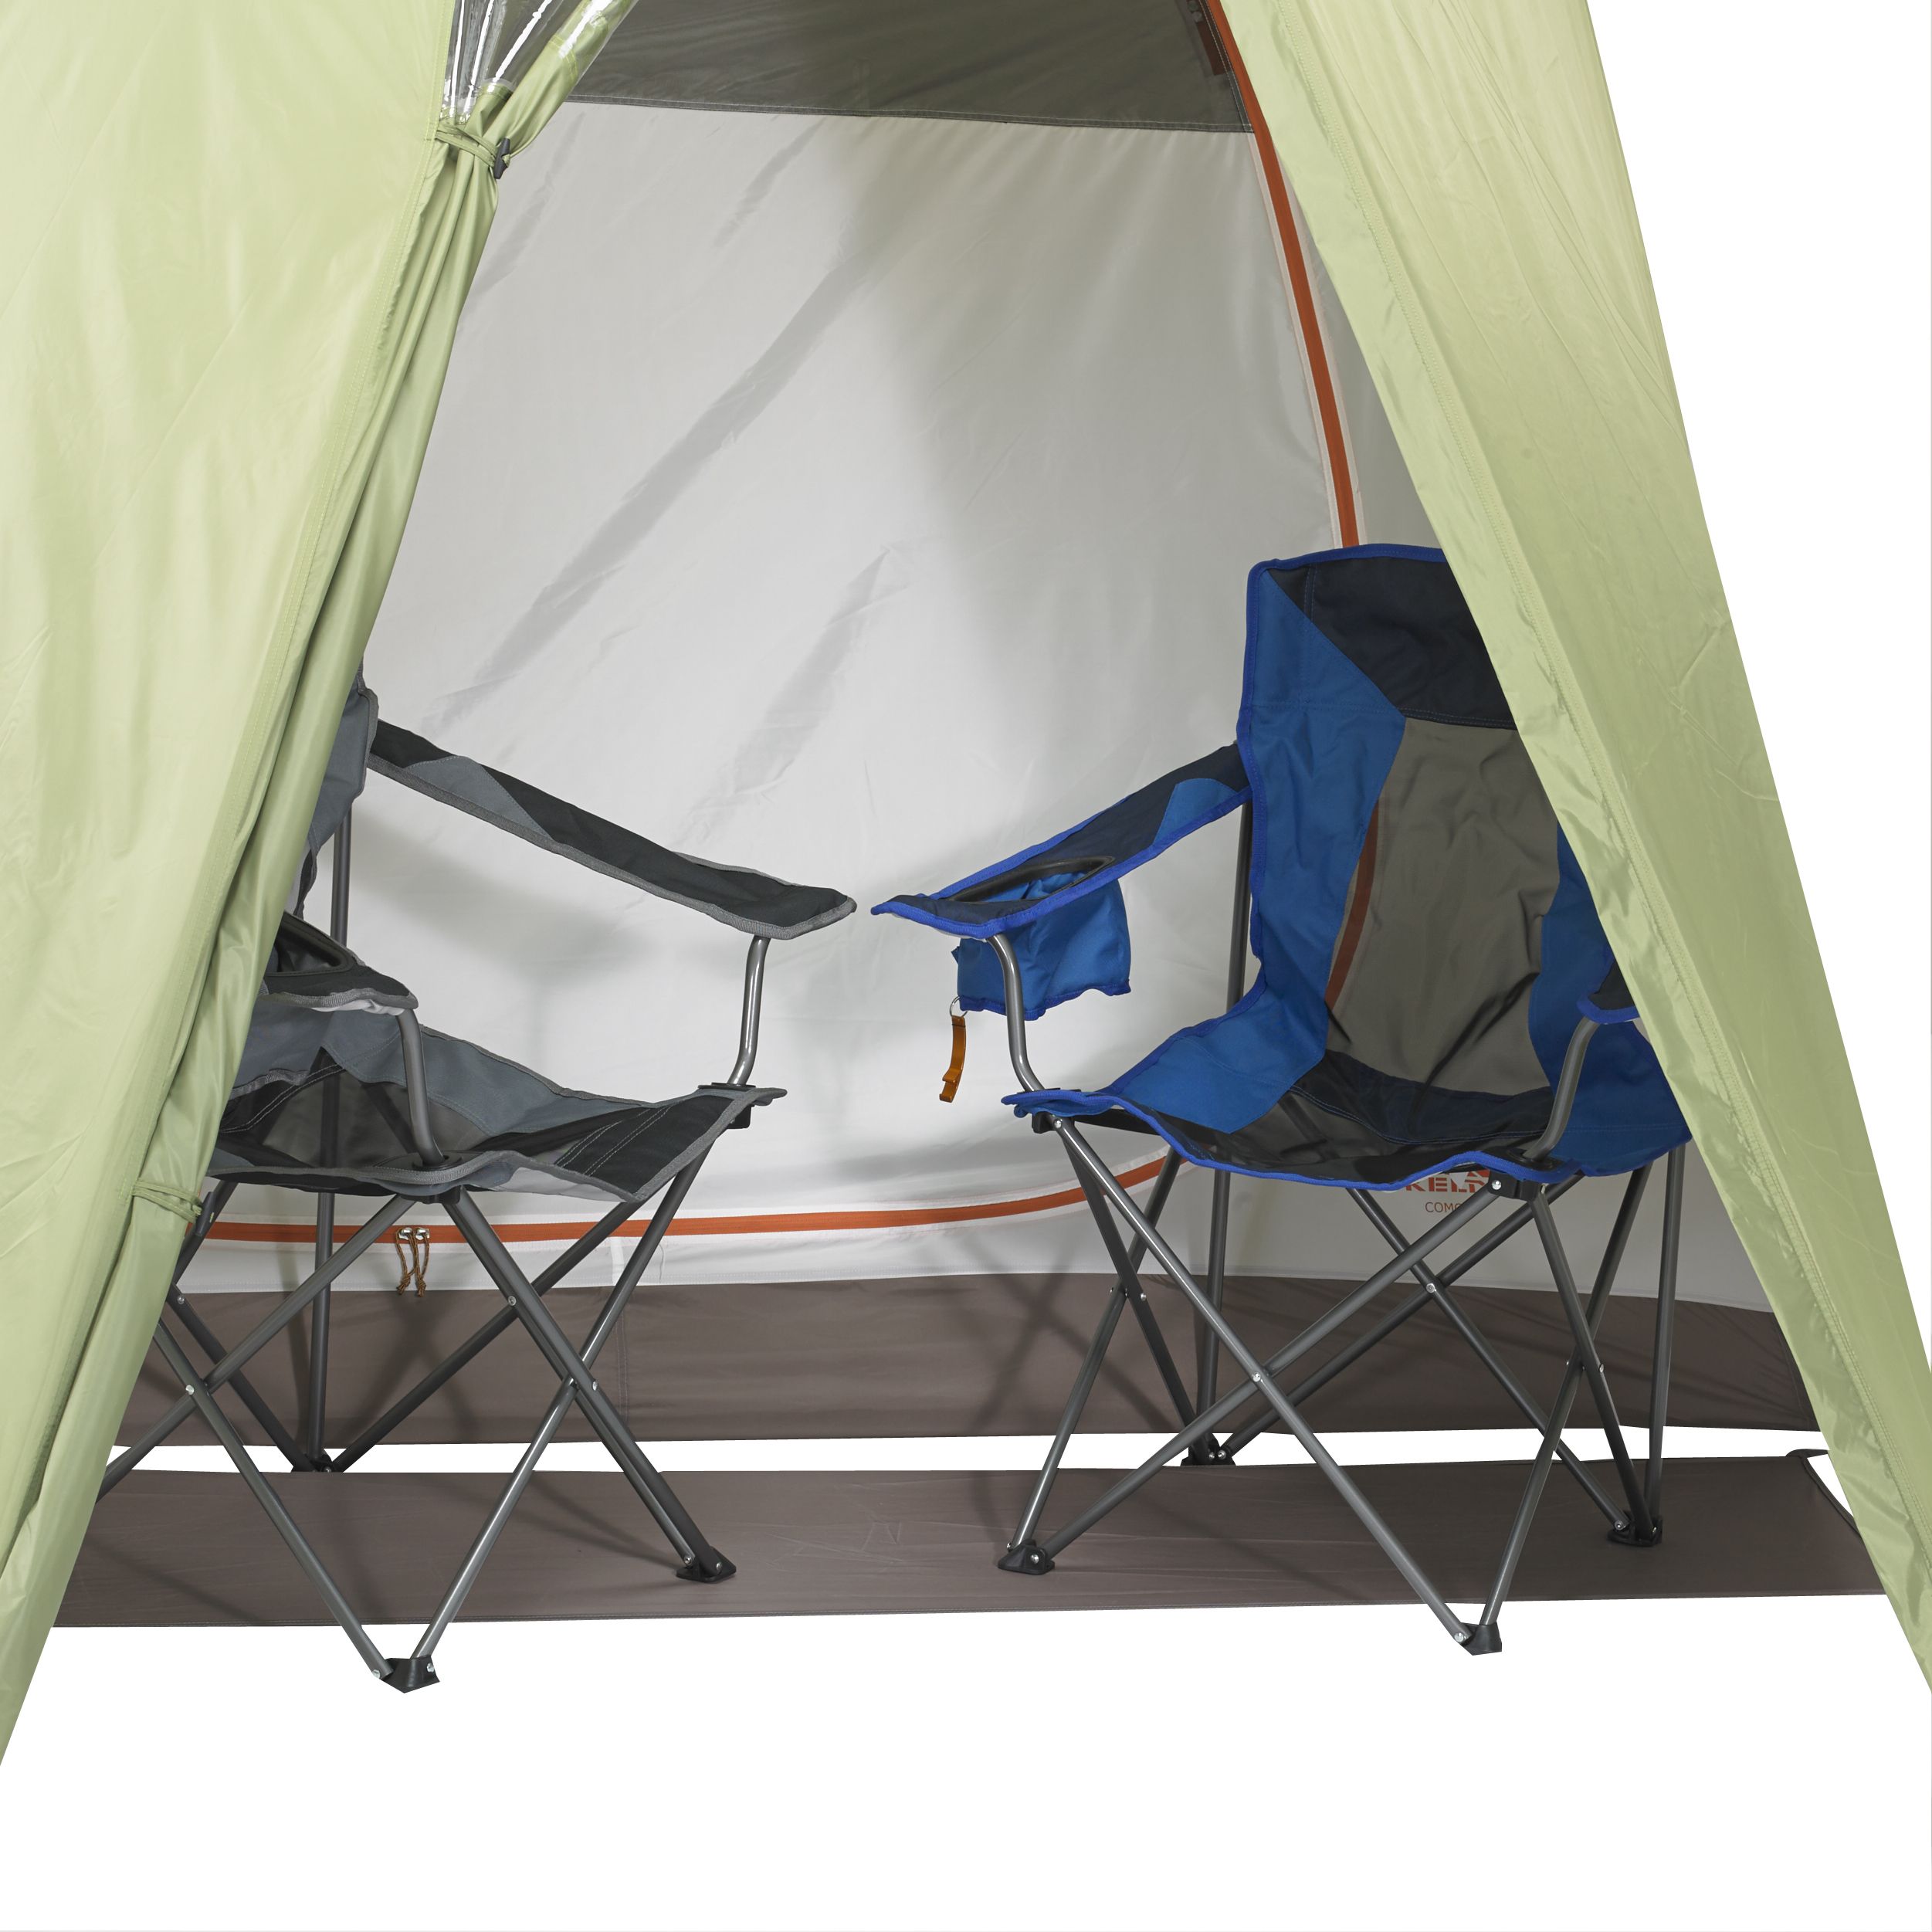 3 Season KELTY COMO 6 FAMILY TENT Sturdy 6 Man Camping-CLEARANCE-RRP £399.99 